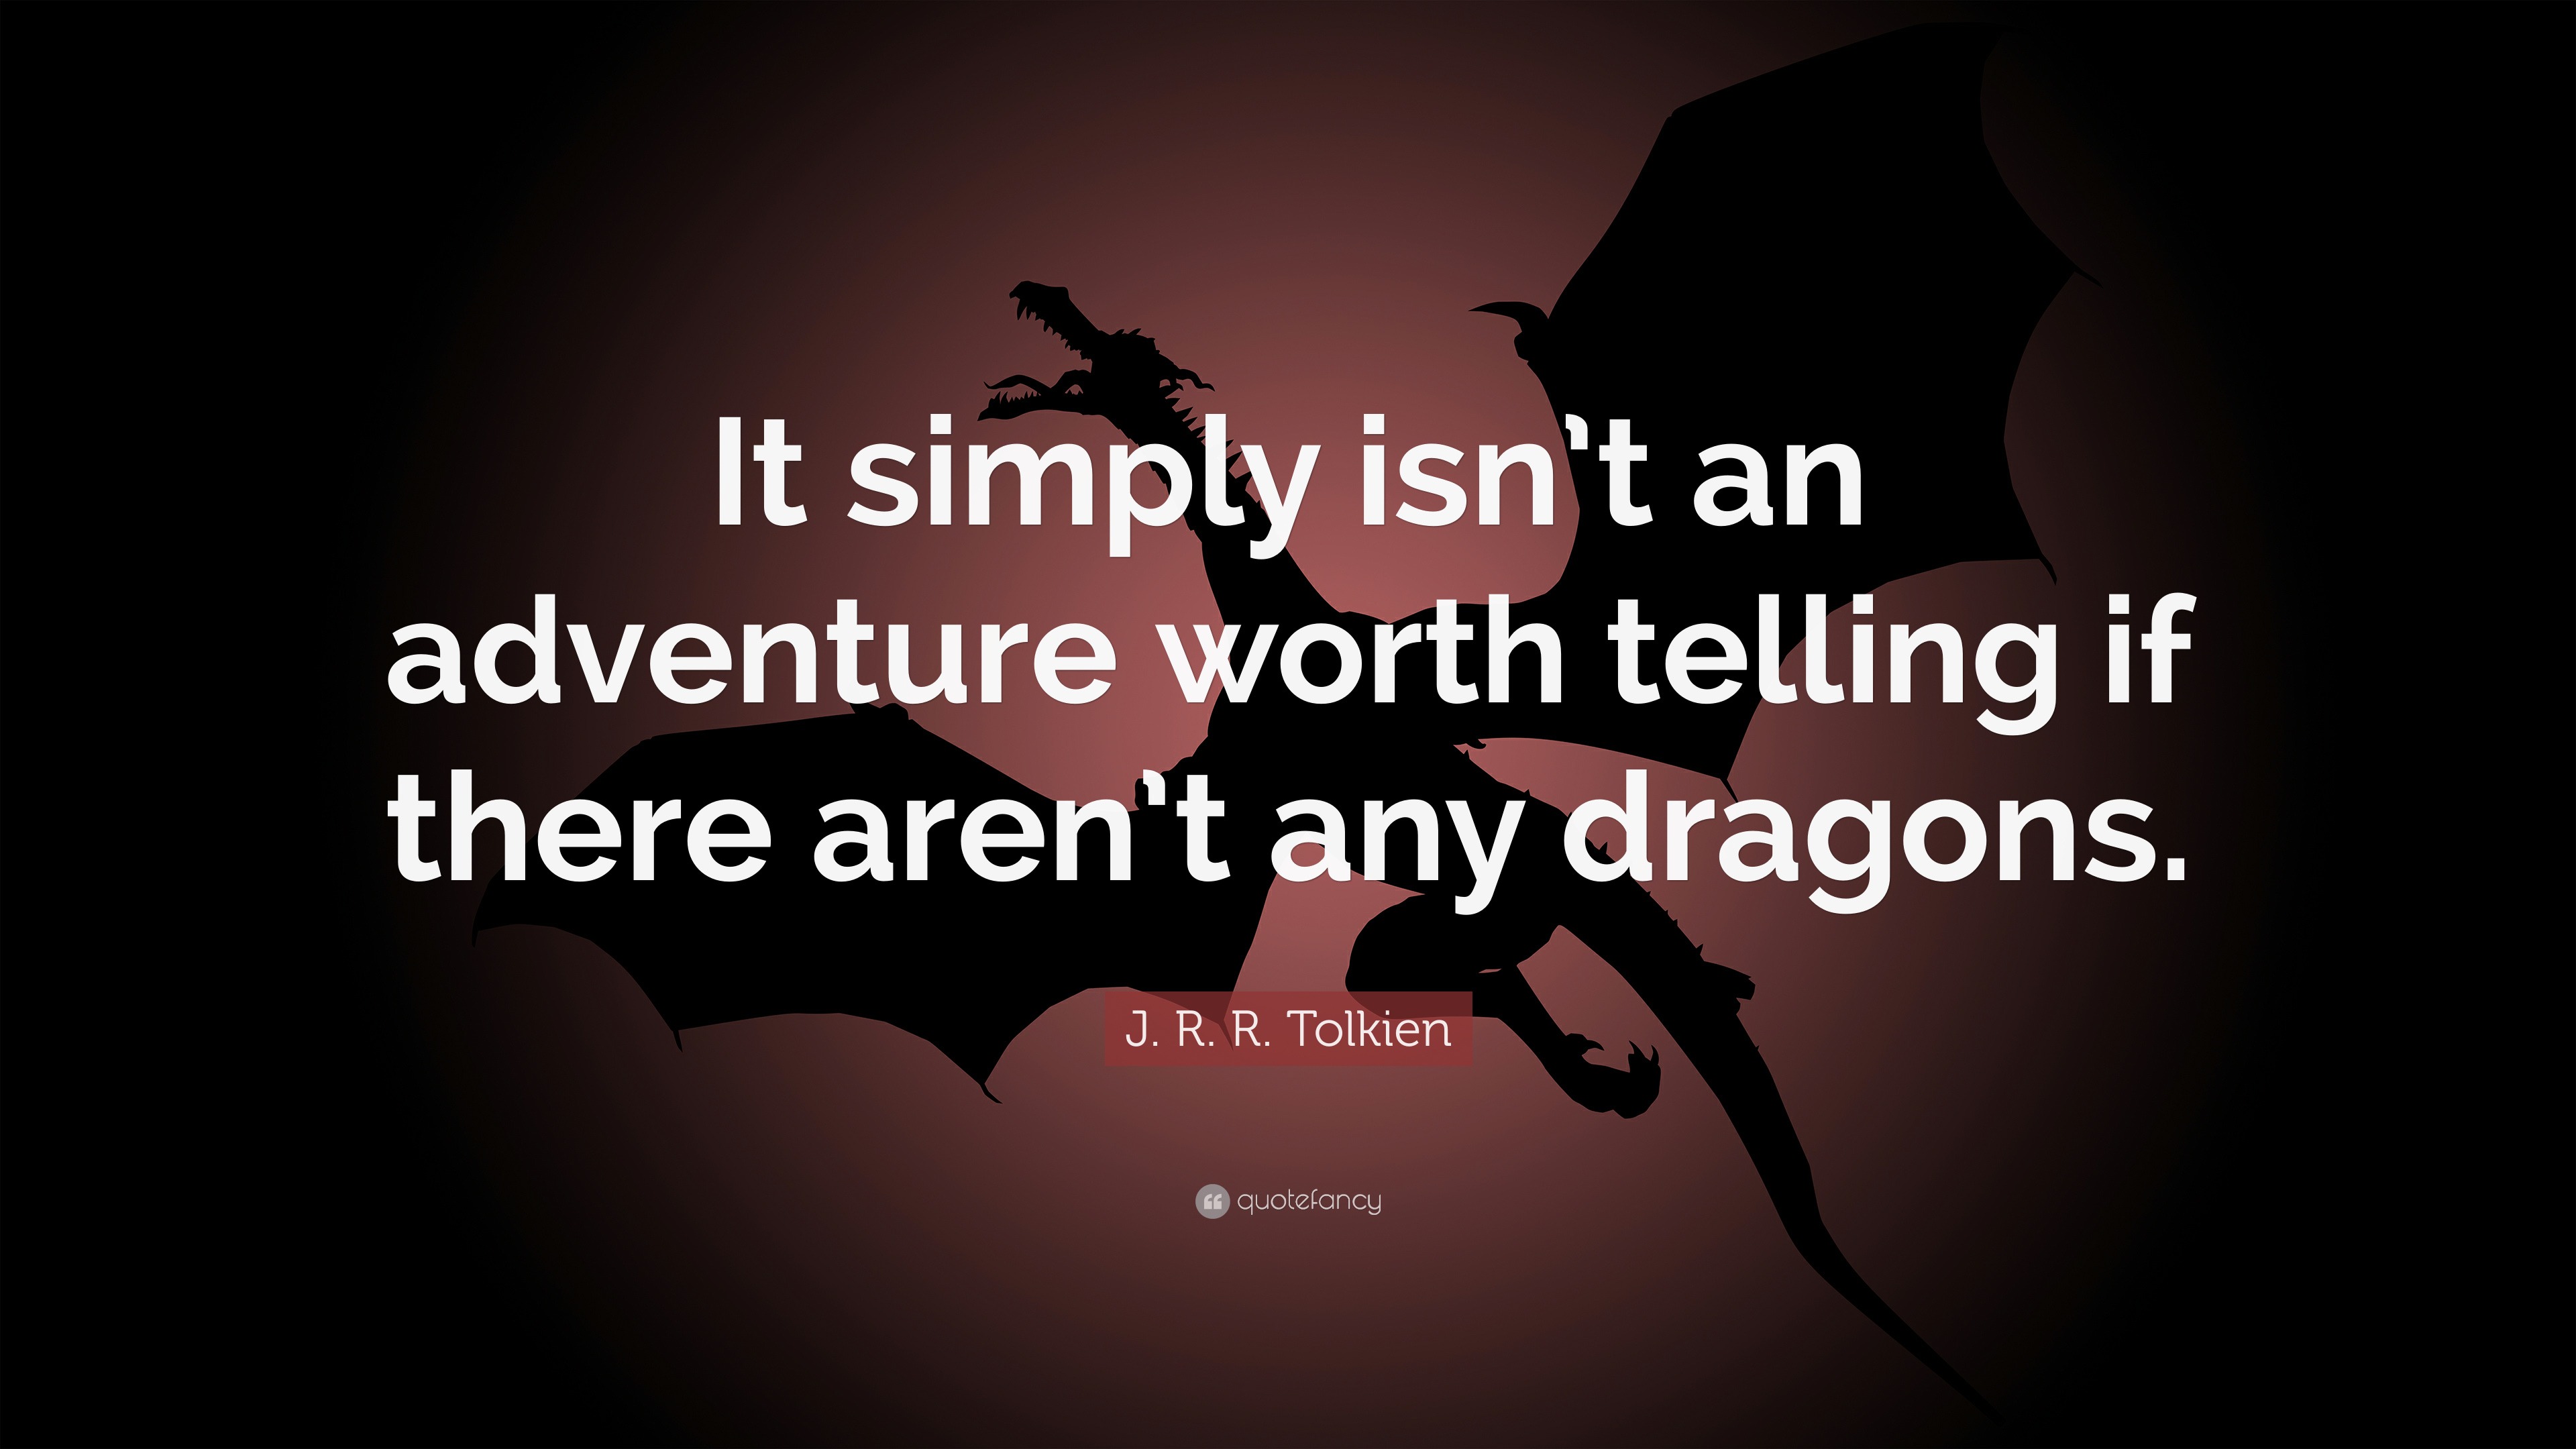 J R R Tolkien Quote It Simply Isn T An Adventure Worth Telling If There Aren T Any